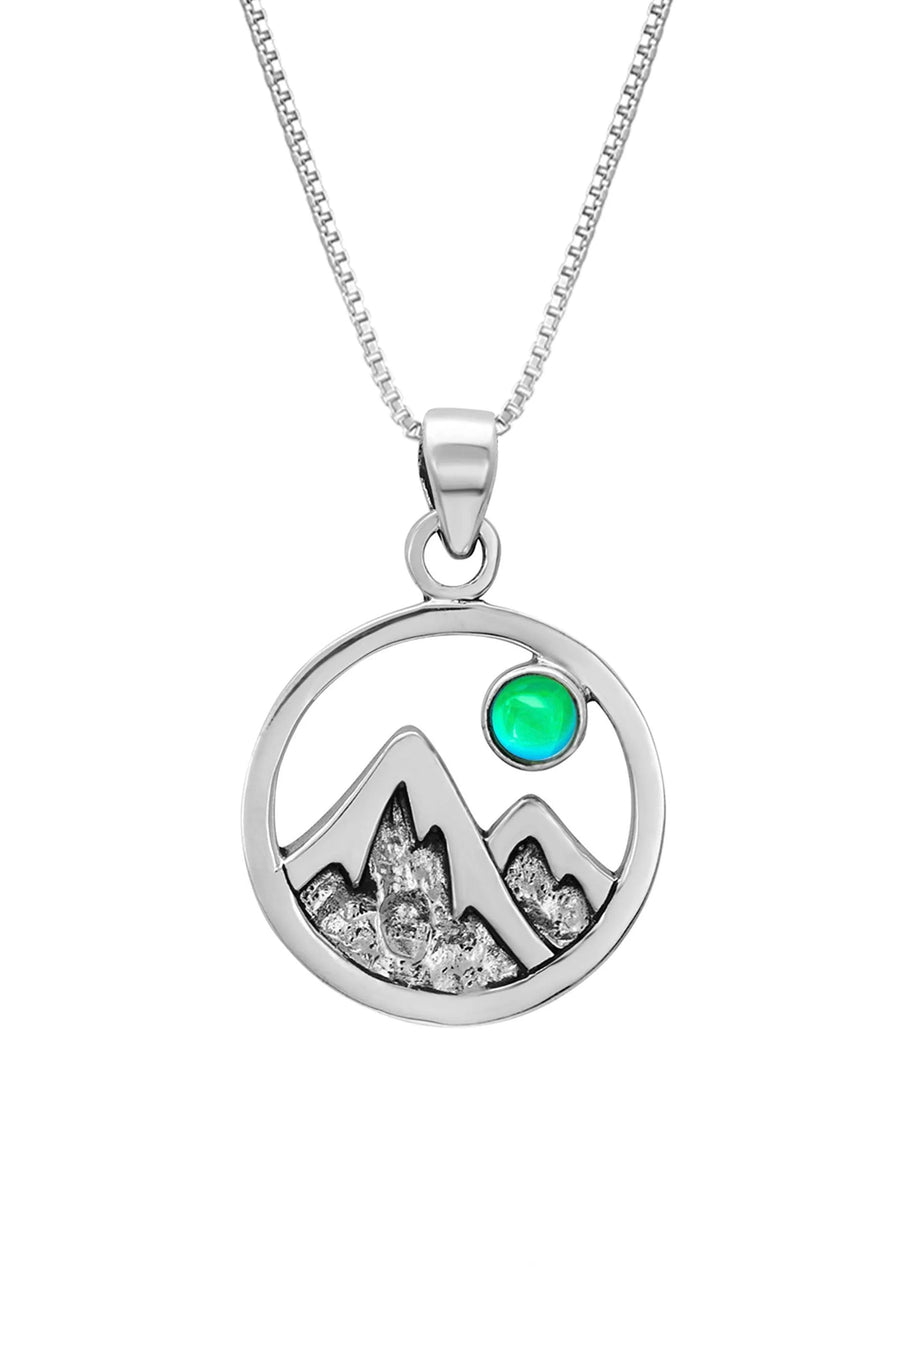 Mountain pendant in sterling silver with art glass cabochon on sterling chain